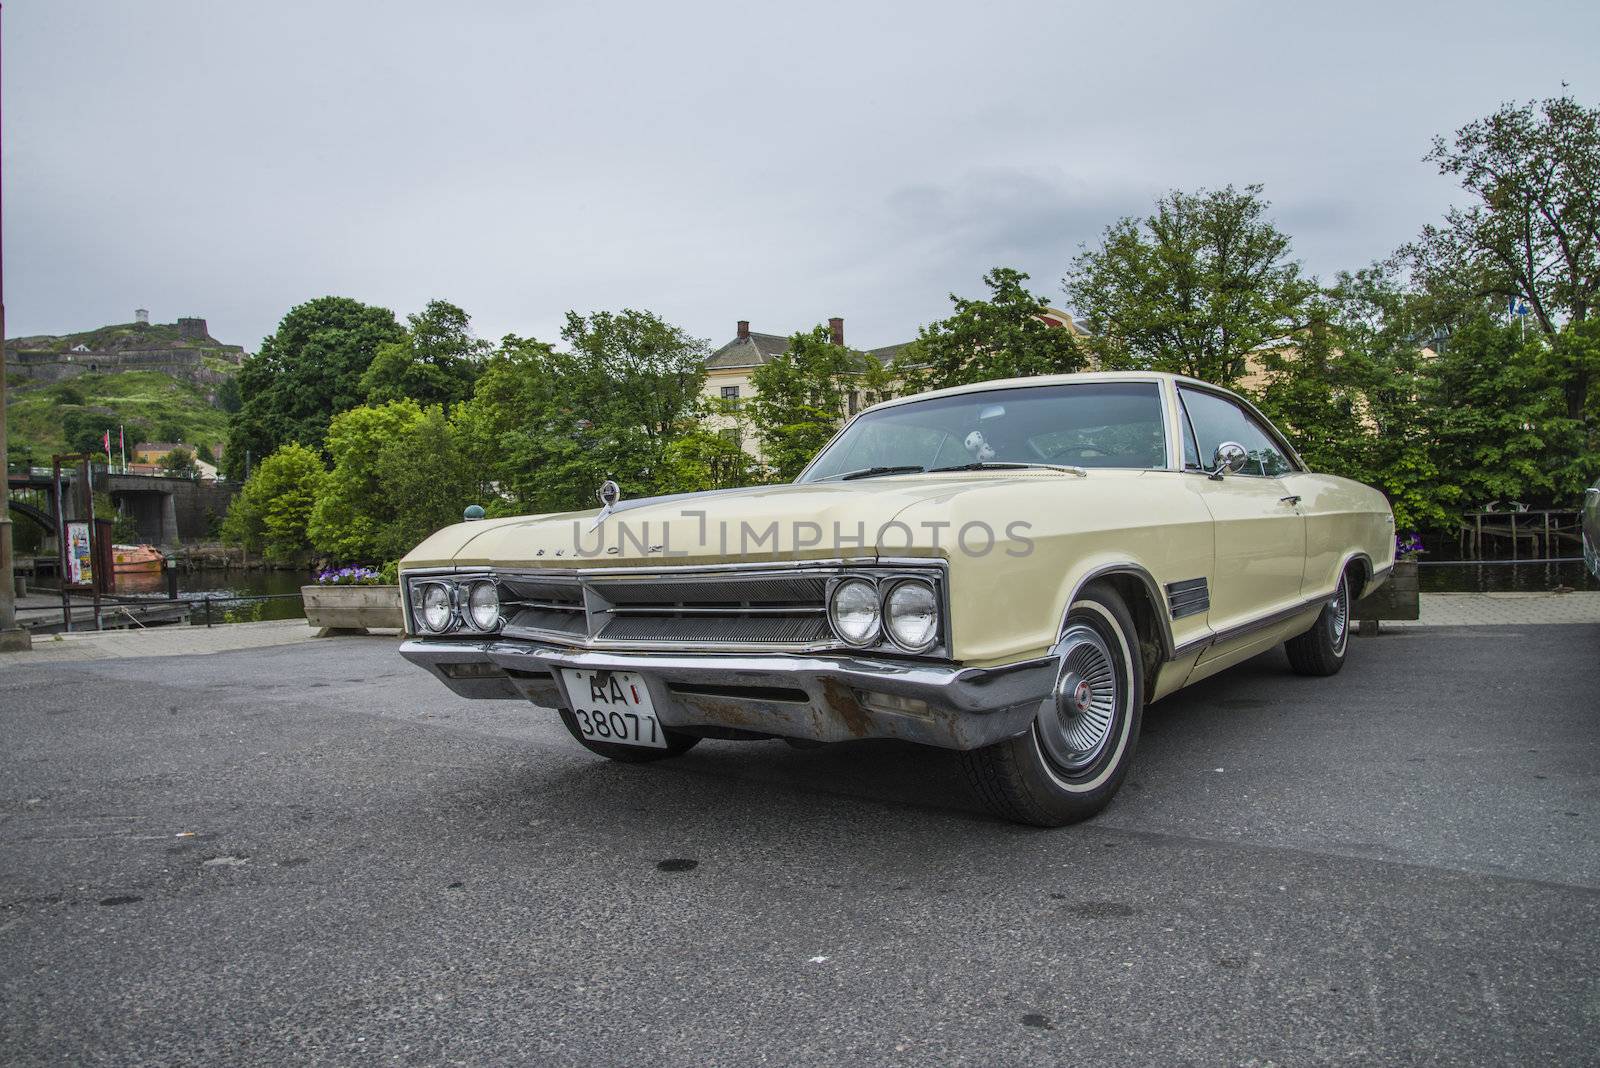 classic-amcar, 1966 buick wildcat by steirus